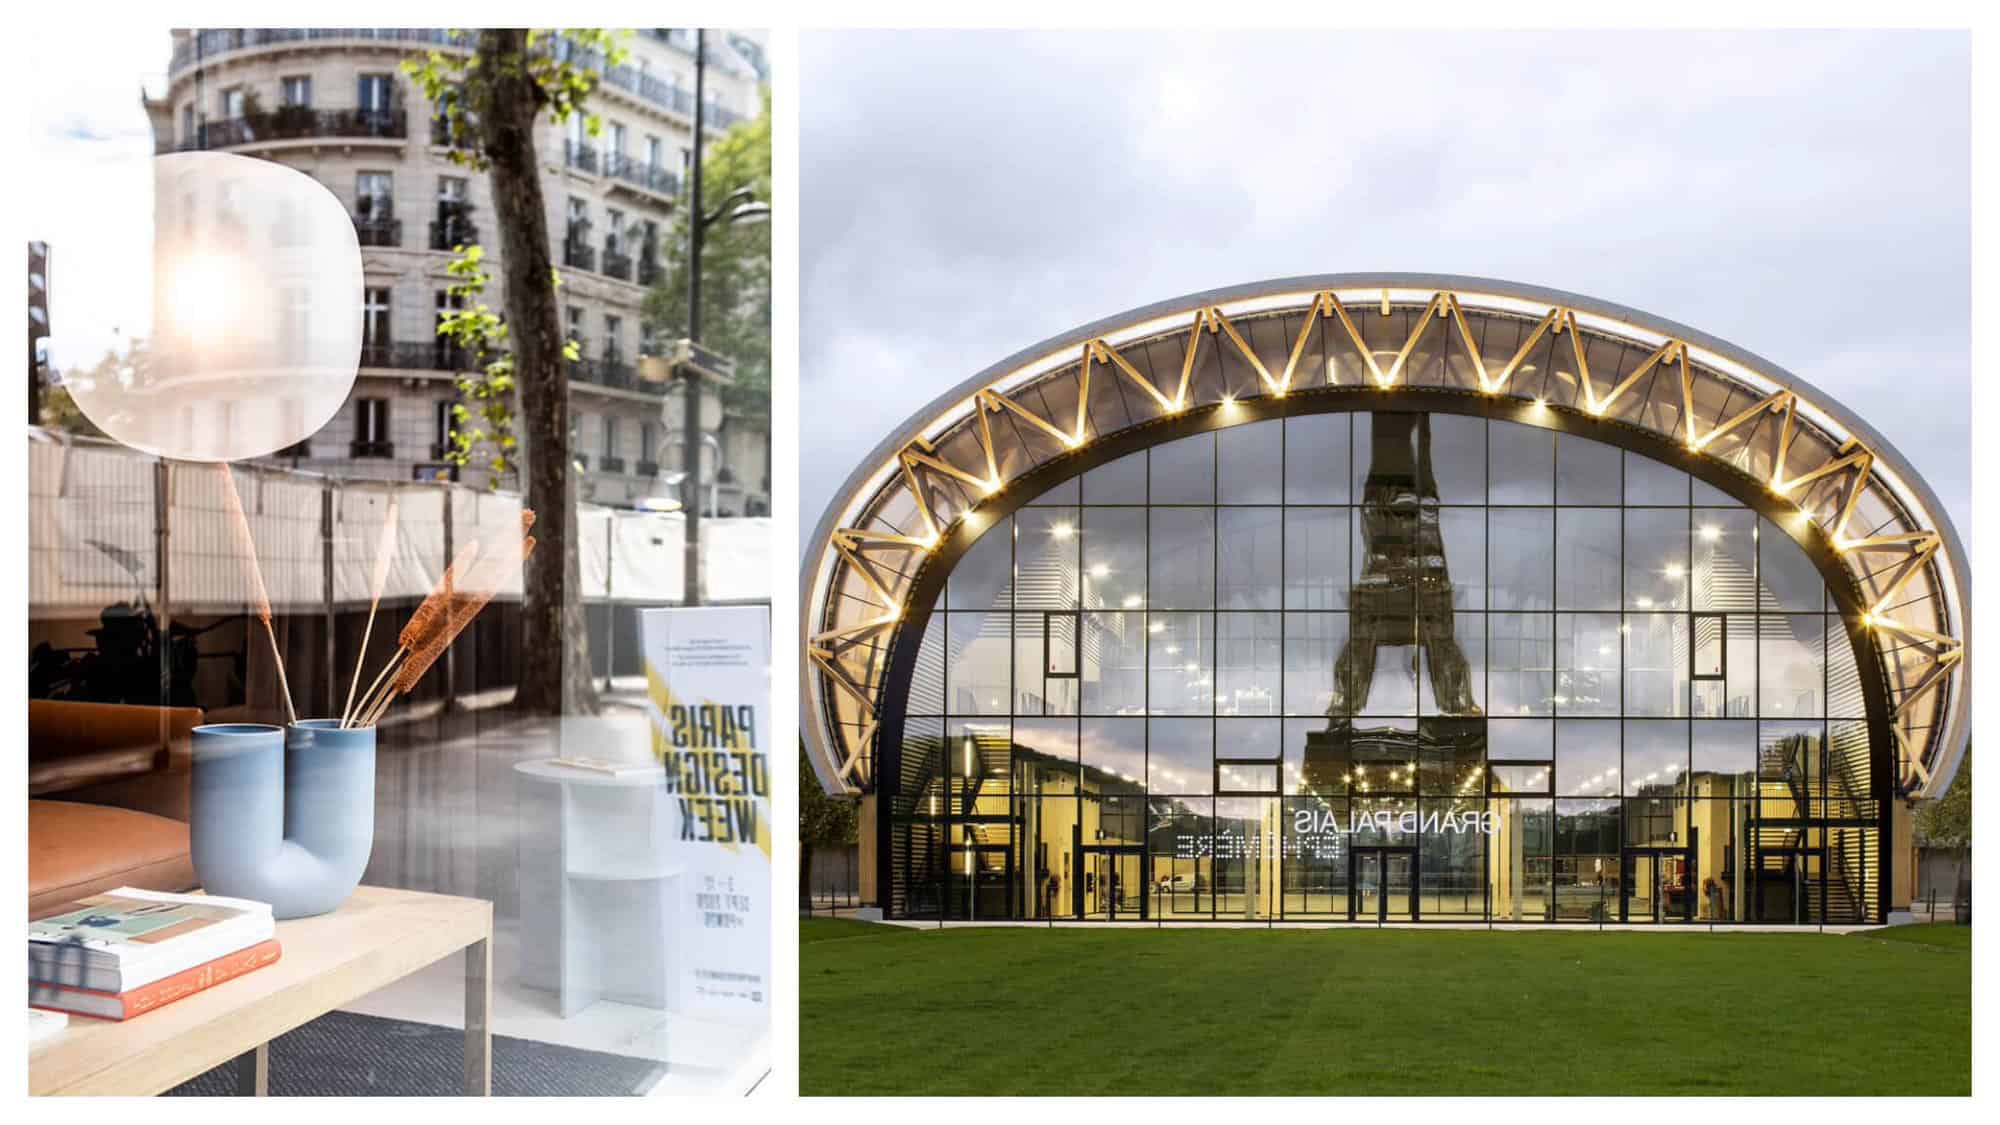 Left: A window display of design objects for Paris Design Week. Right: the Grand Palais Ephemere with the Eiffel Tower reflected in the windows.